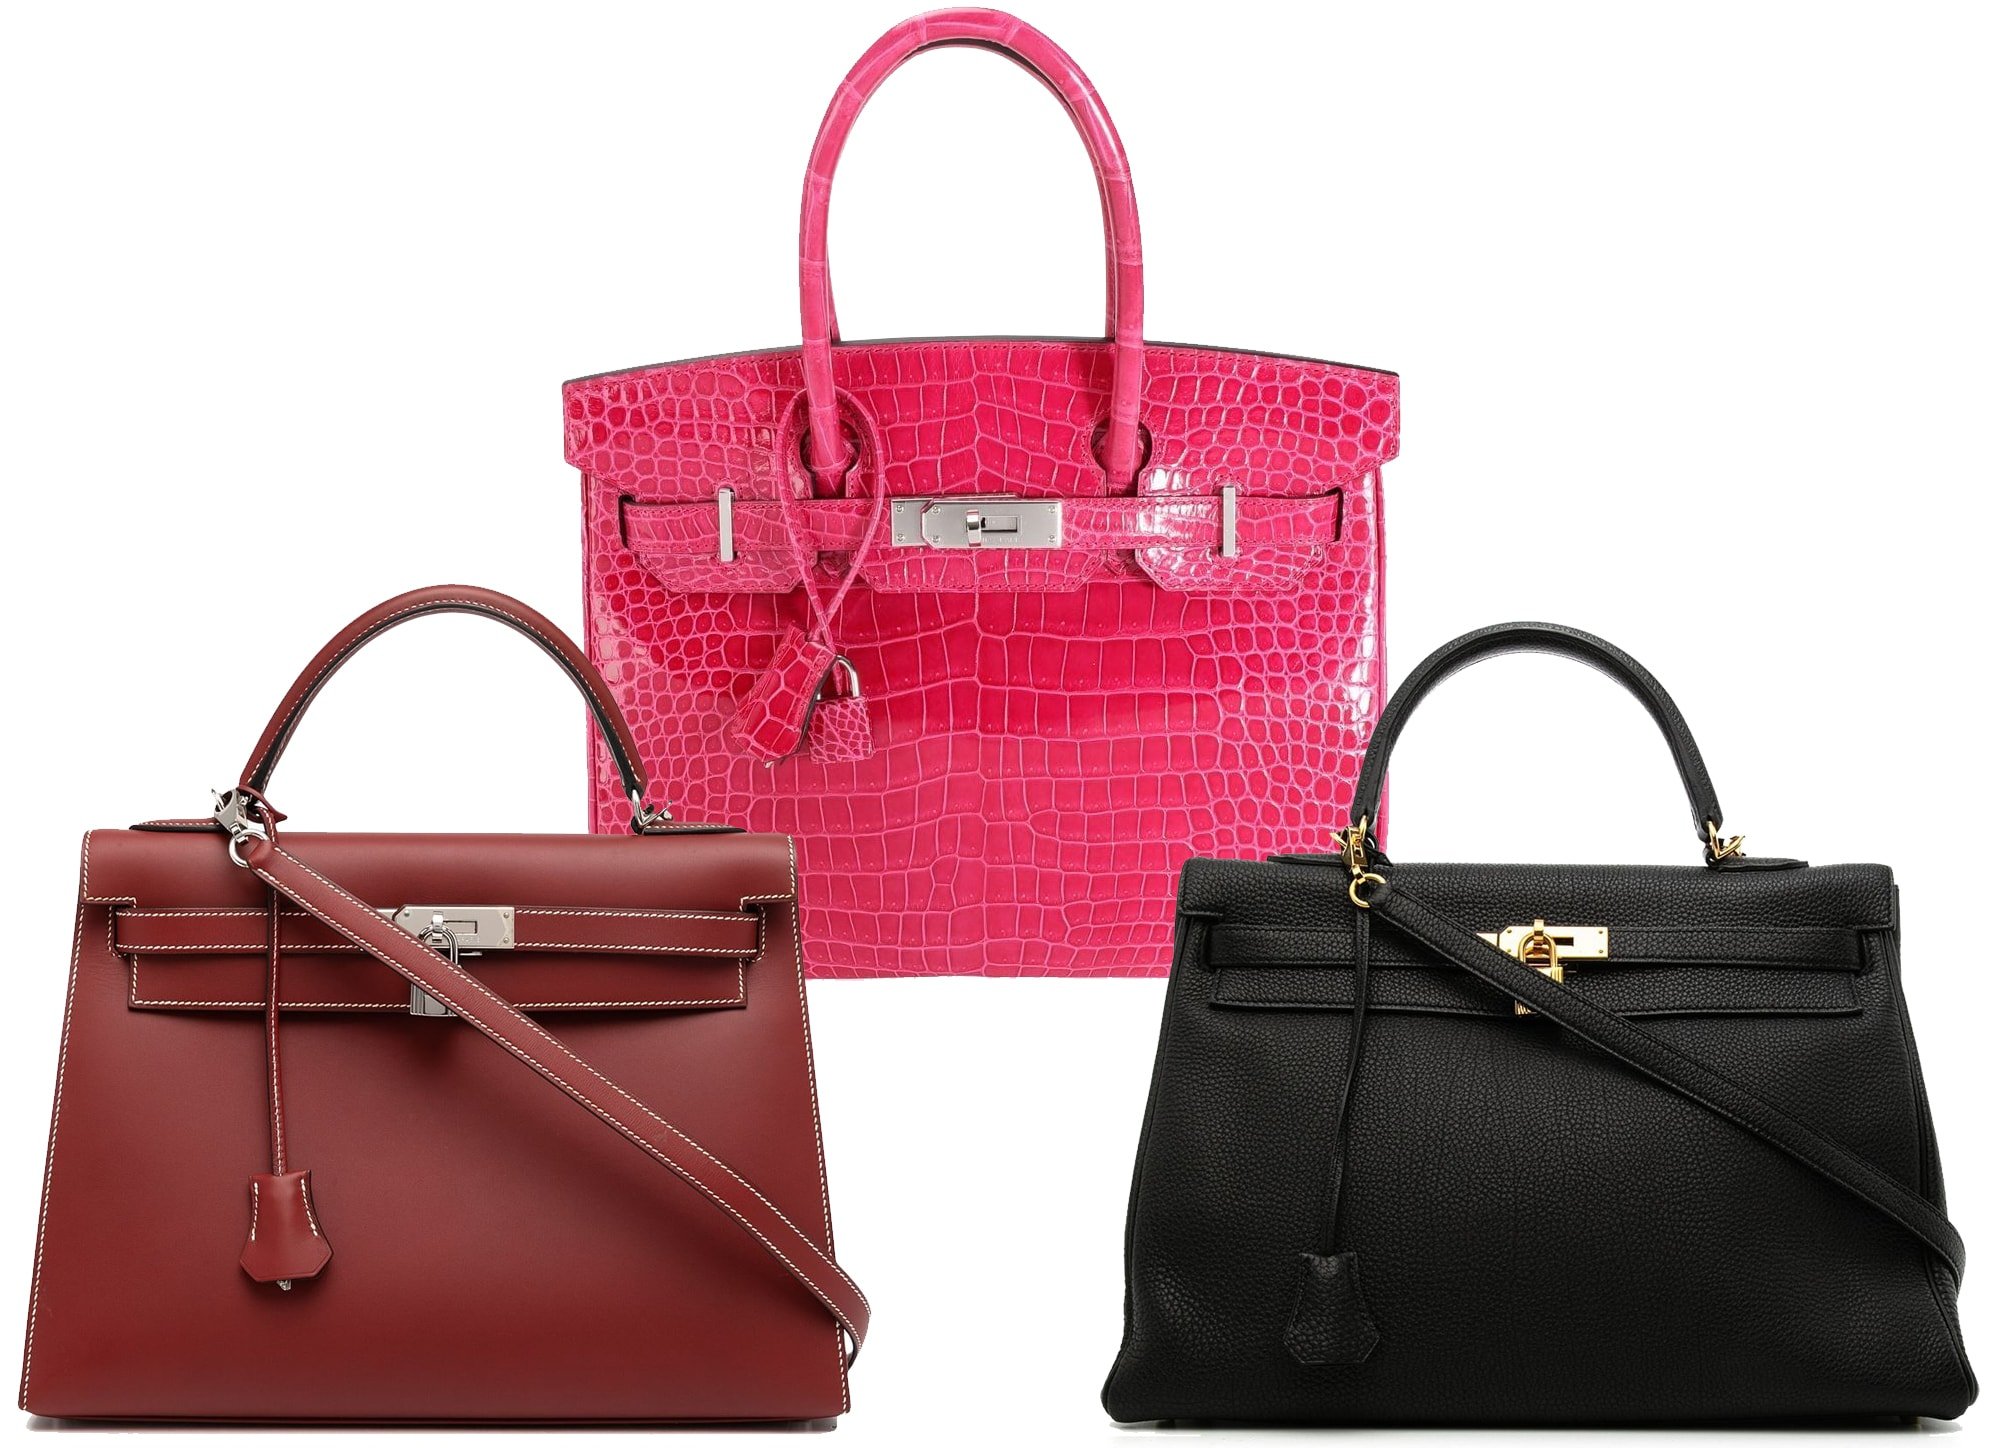 Familiarize yourself with the different materials, sizes, and colors of Hermes bags before making your purchase